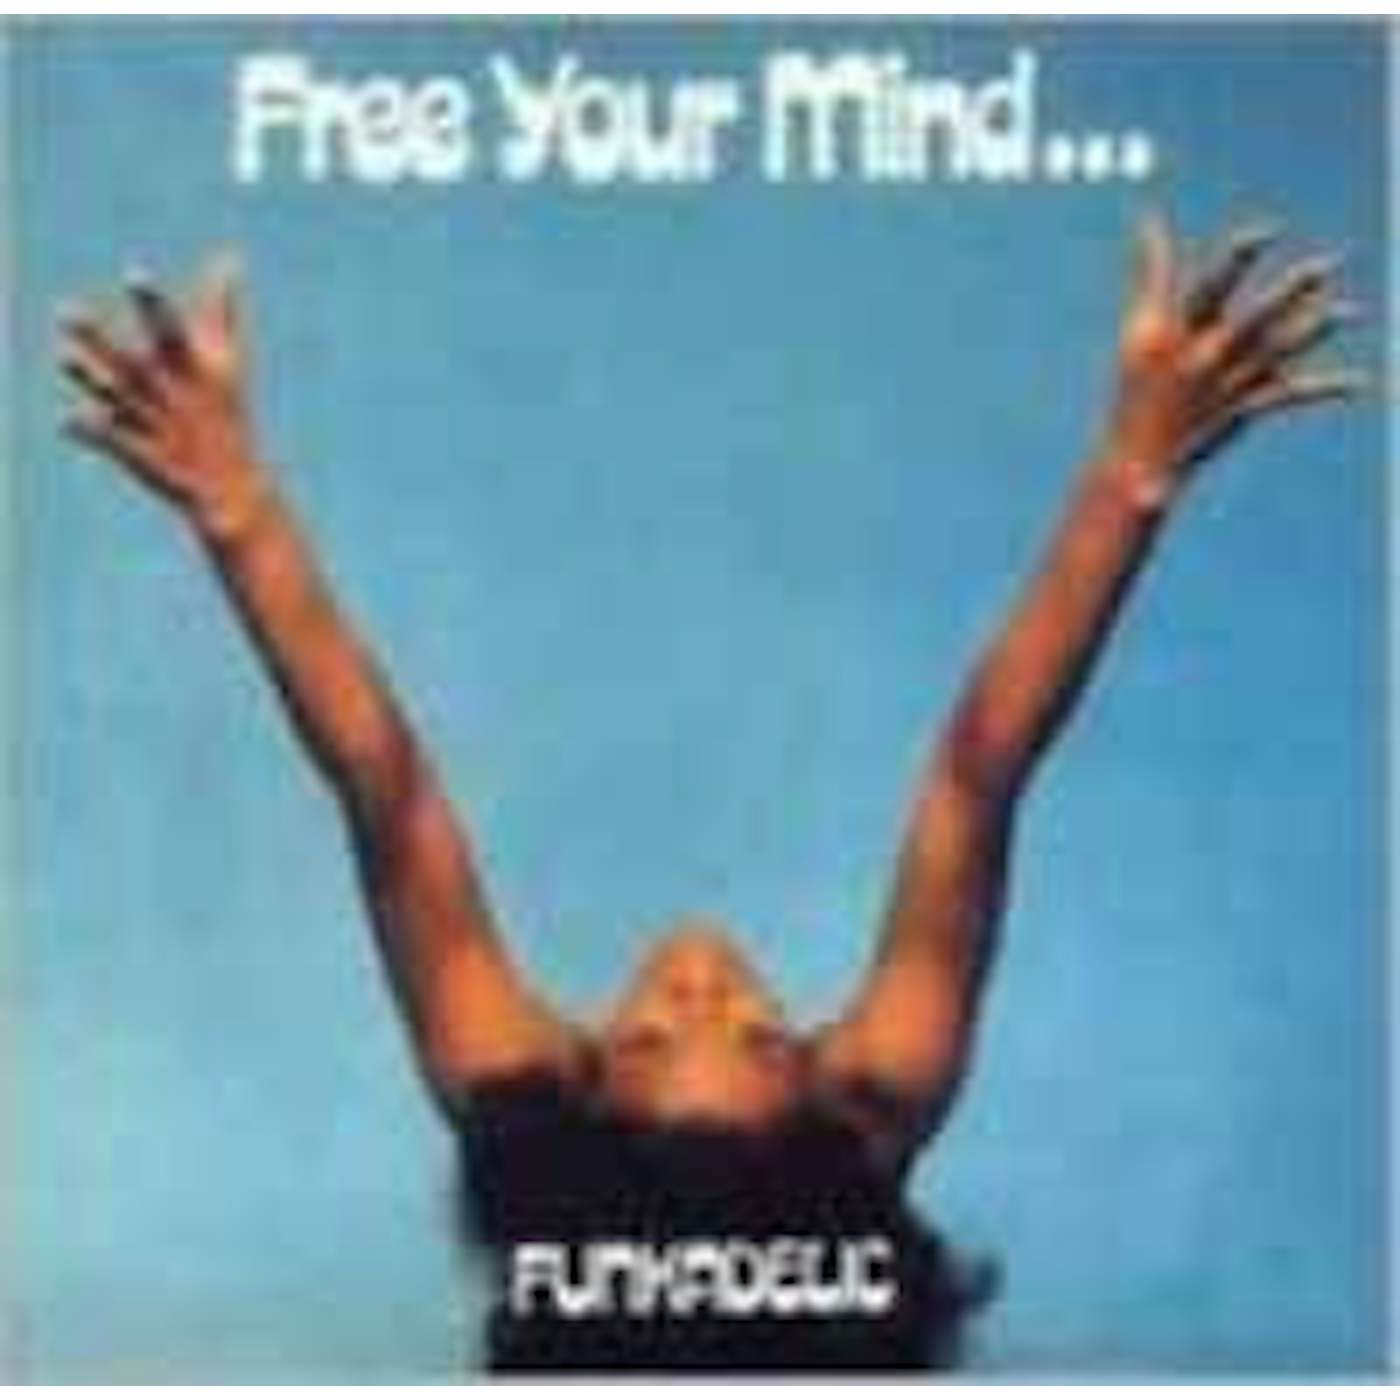 Funkadelic LP - Free Your Mind...And Your Ass (Vinyl)